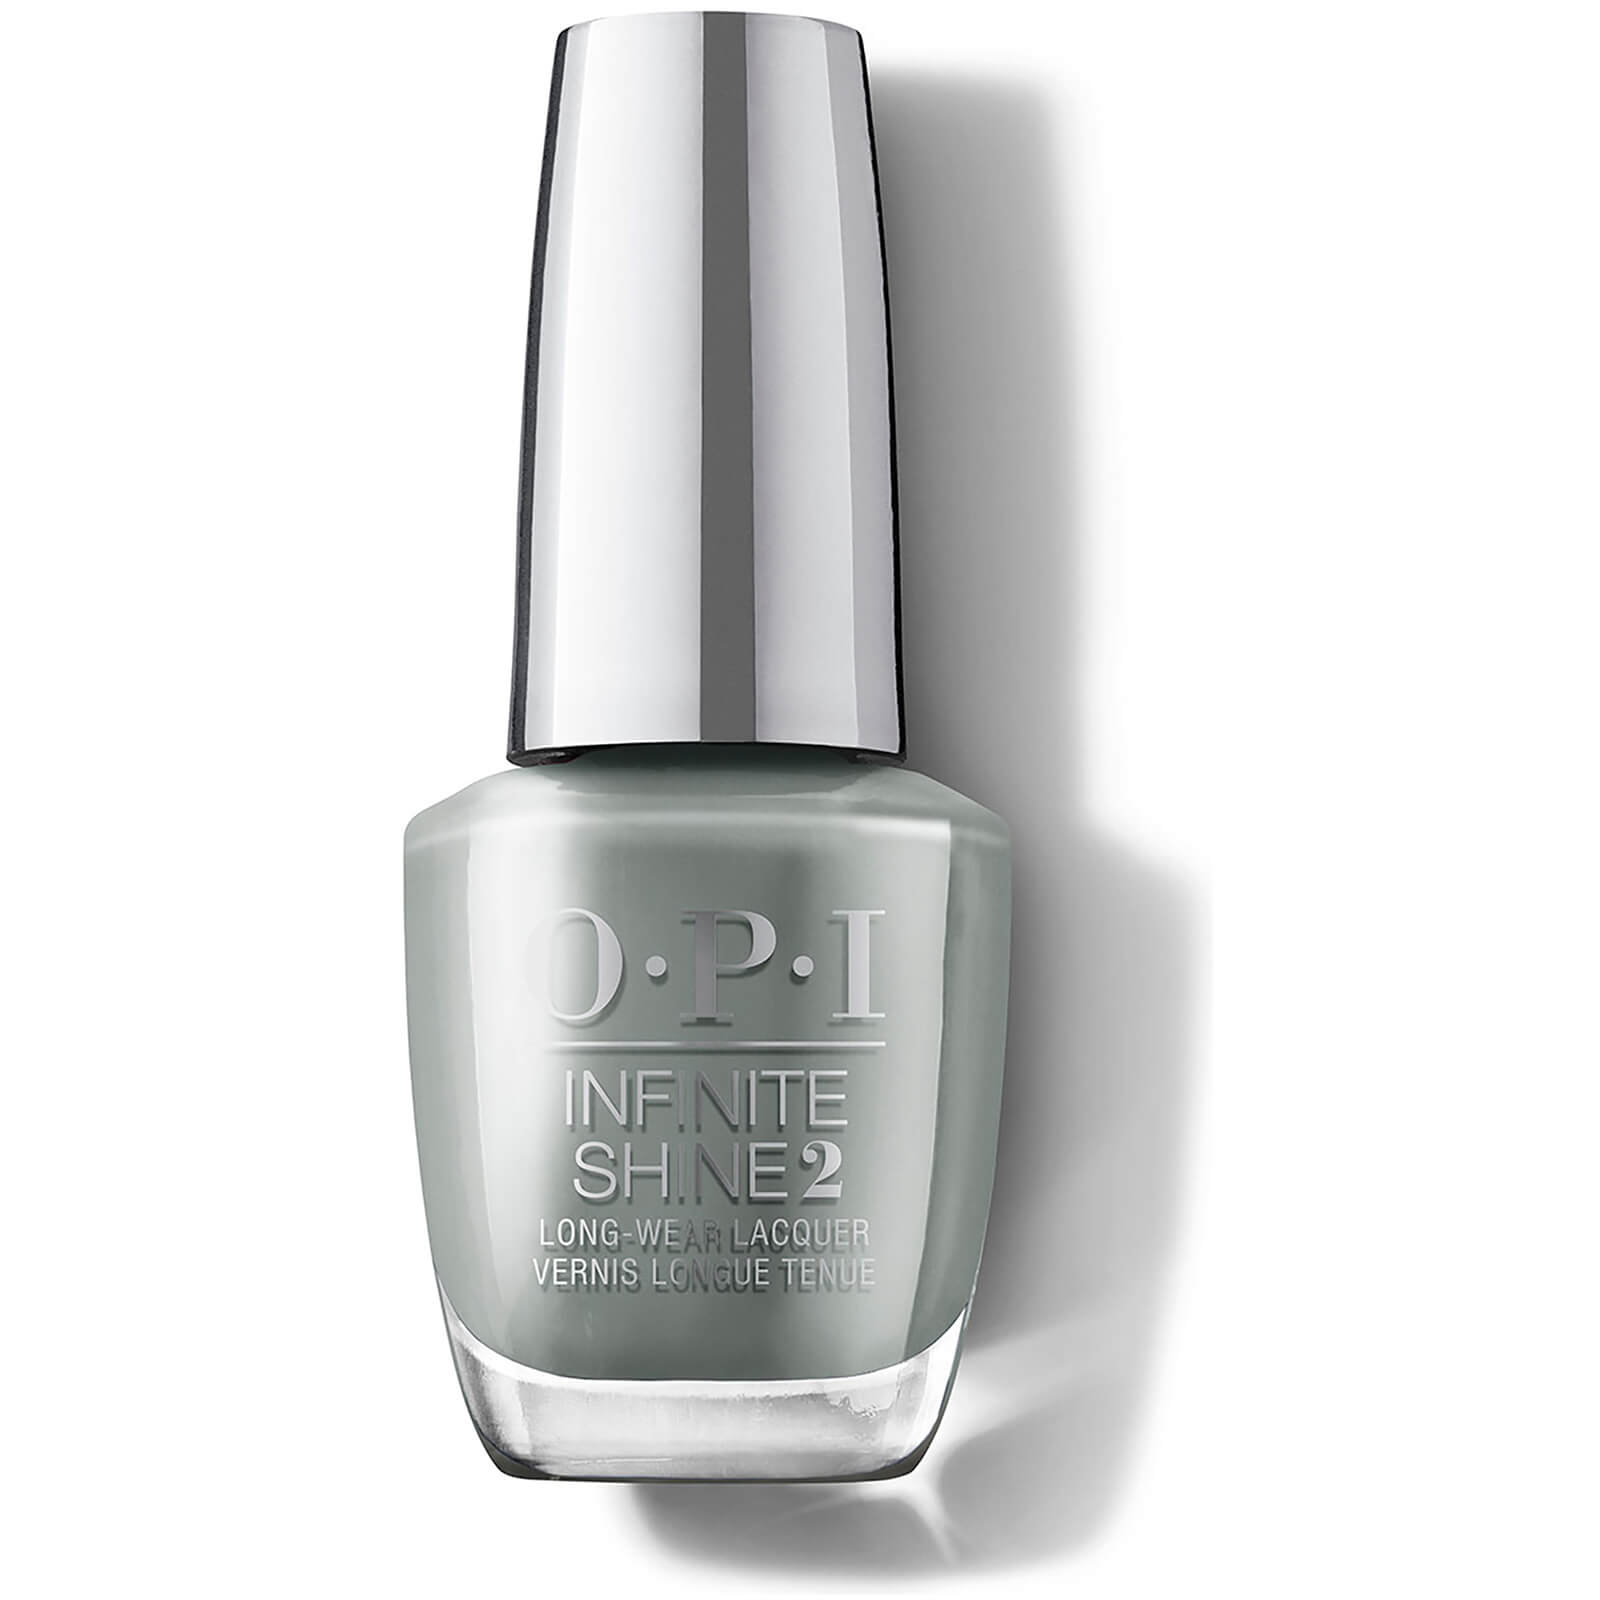 OPI Nail Polish Muse of Milan Collection Infinite Shine Long Wear System – Suzi Talks with Her Hands 15ml lookfantastic.com imagine